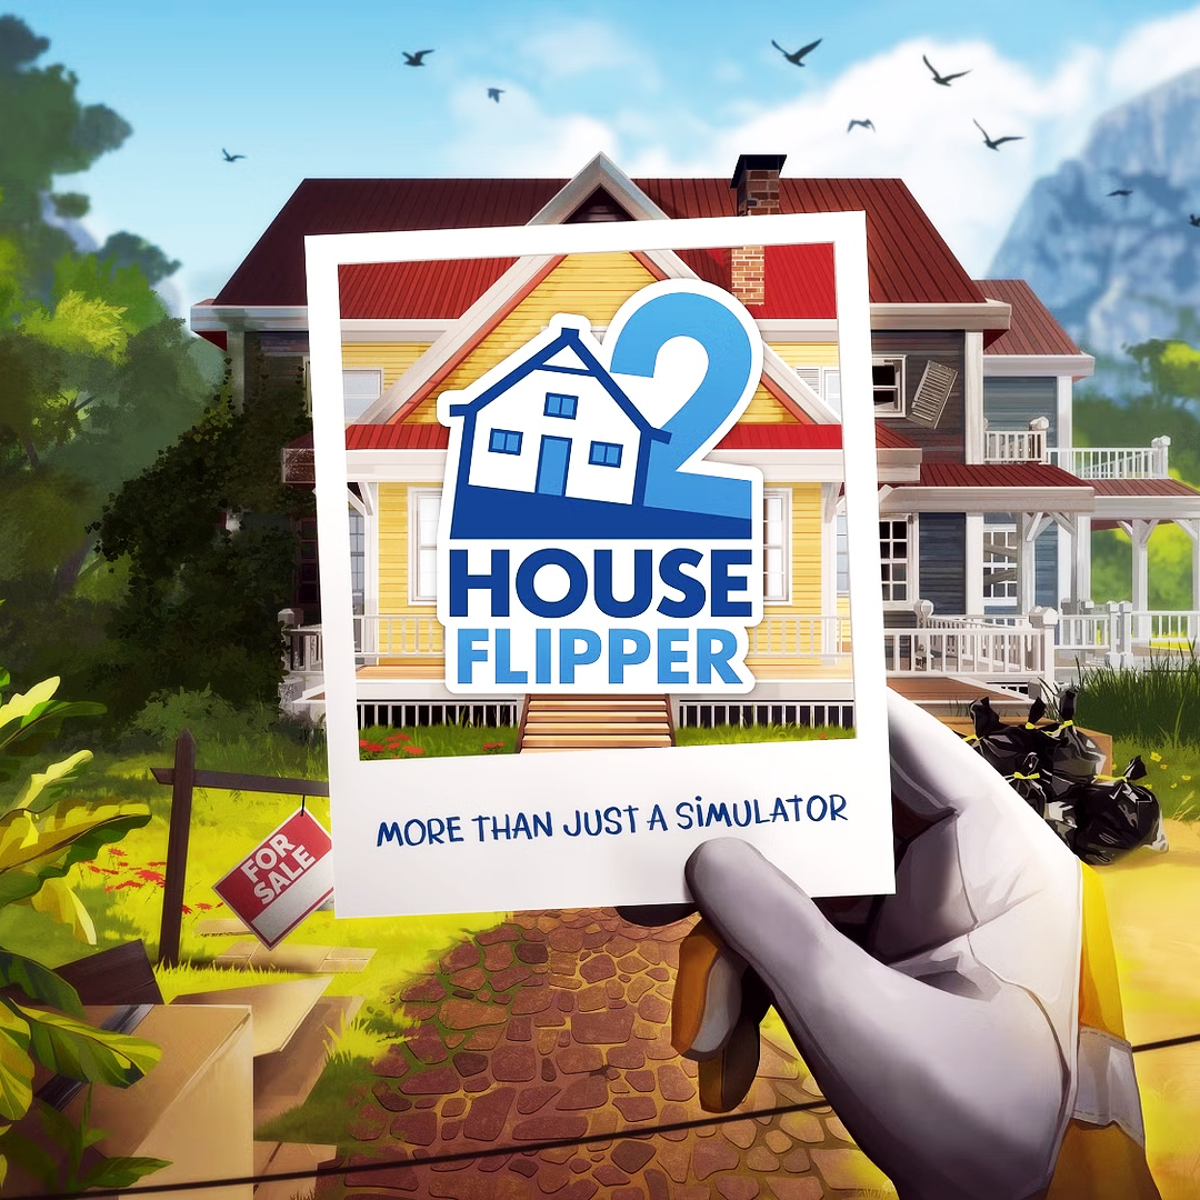 Everything you need to know about House Flipper 2 on its hotly